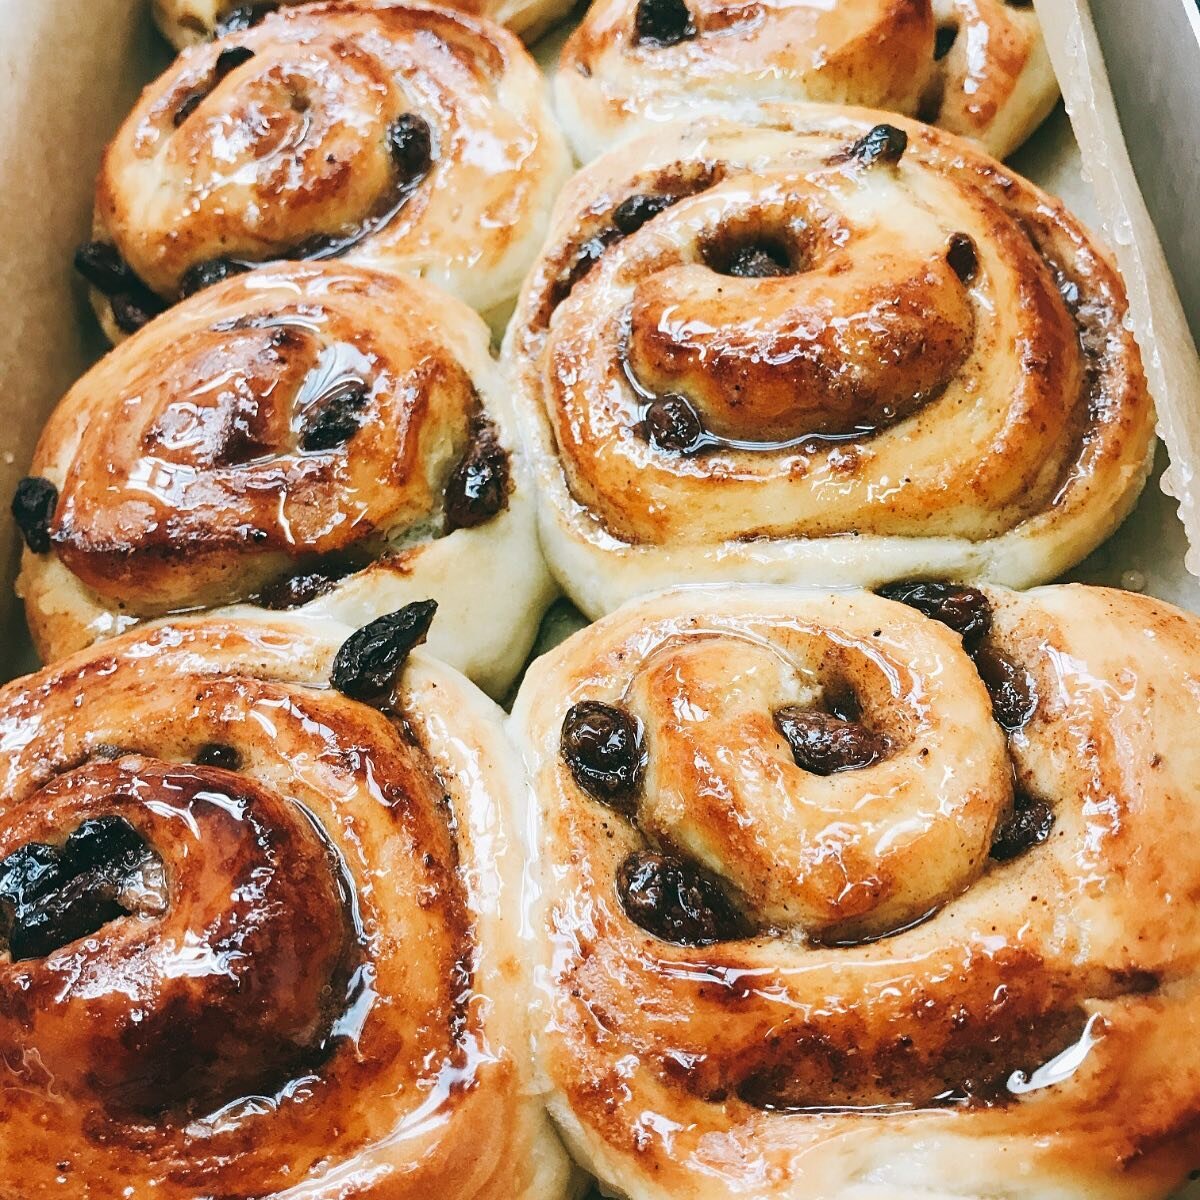 Cakes cakes and more cakes! 

Our bakery counter will be brimming with fresh homemade treats from @sticky_fig_catering including these sticky buns, fruit scones, danishes and chocolate brownies 

#bakerycounter #homemade #local #familybusiness #takea